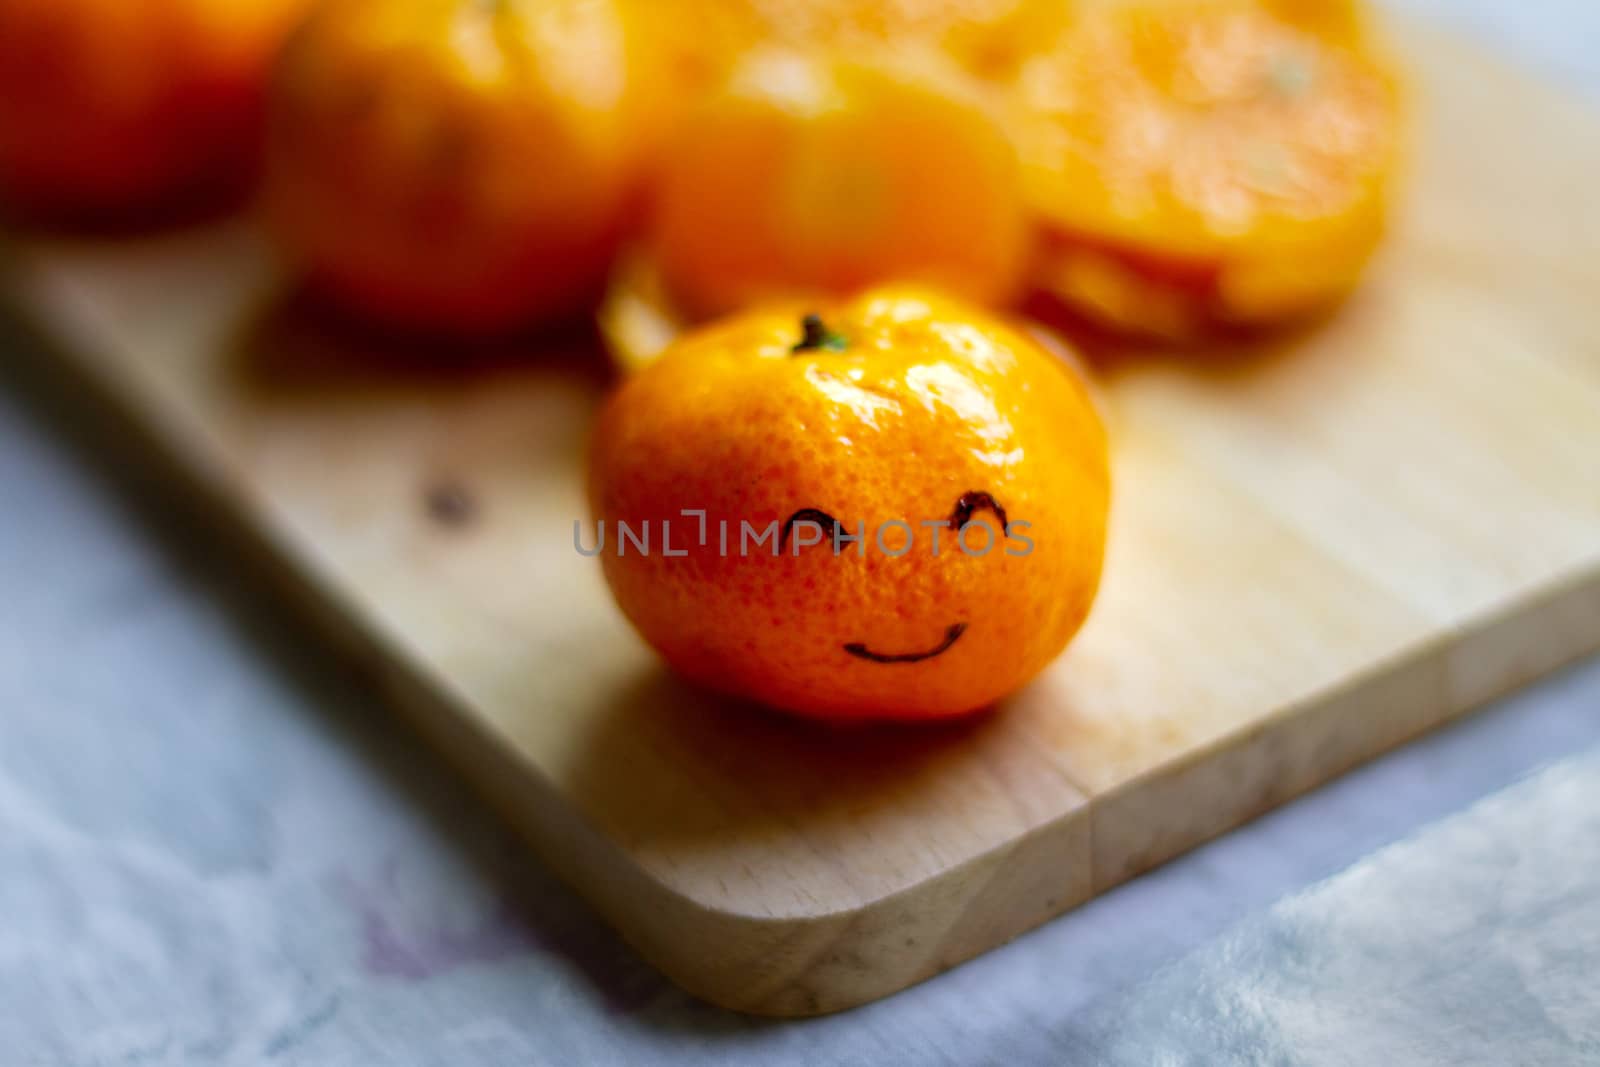 Smiley Face on a Clementine Orange by Sonnet15